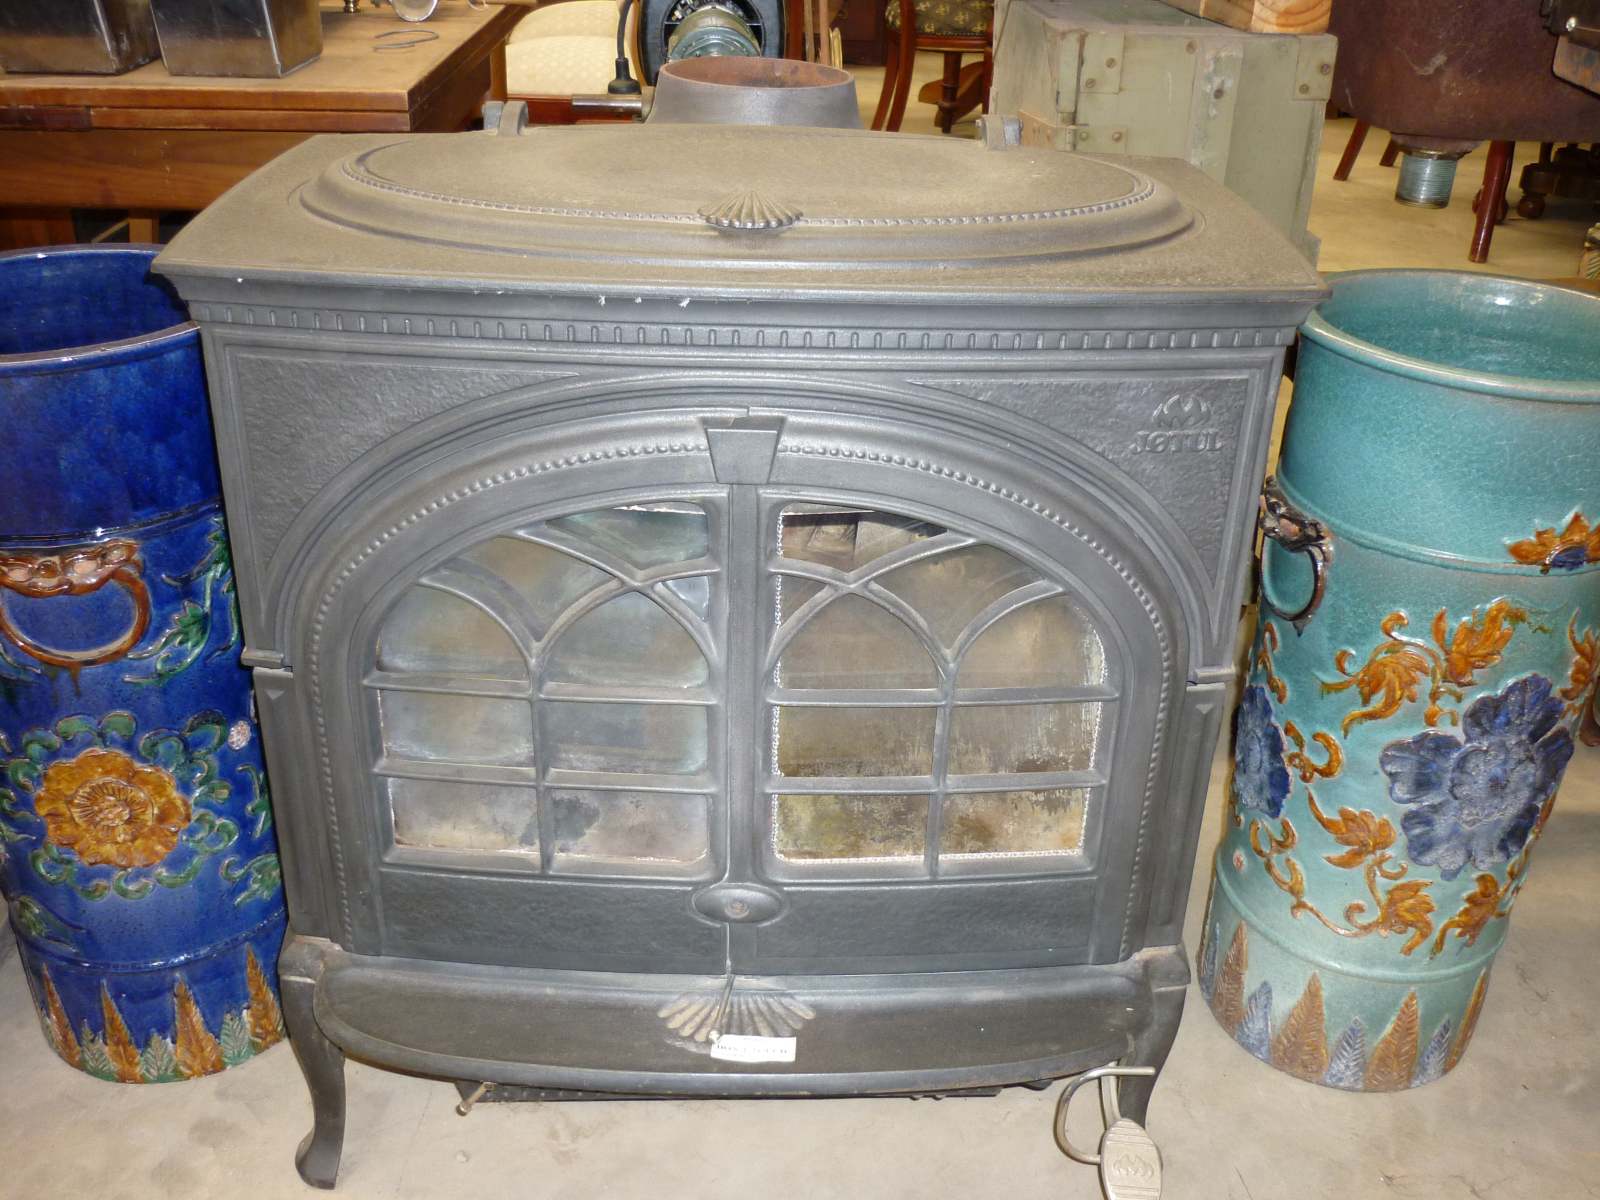 Jotul Slow Combustion Cast Iron Fireplace with Double Doors. Top Opens with Foot Pedal